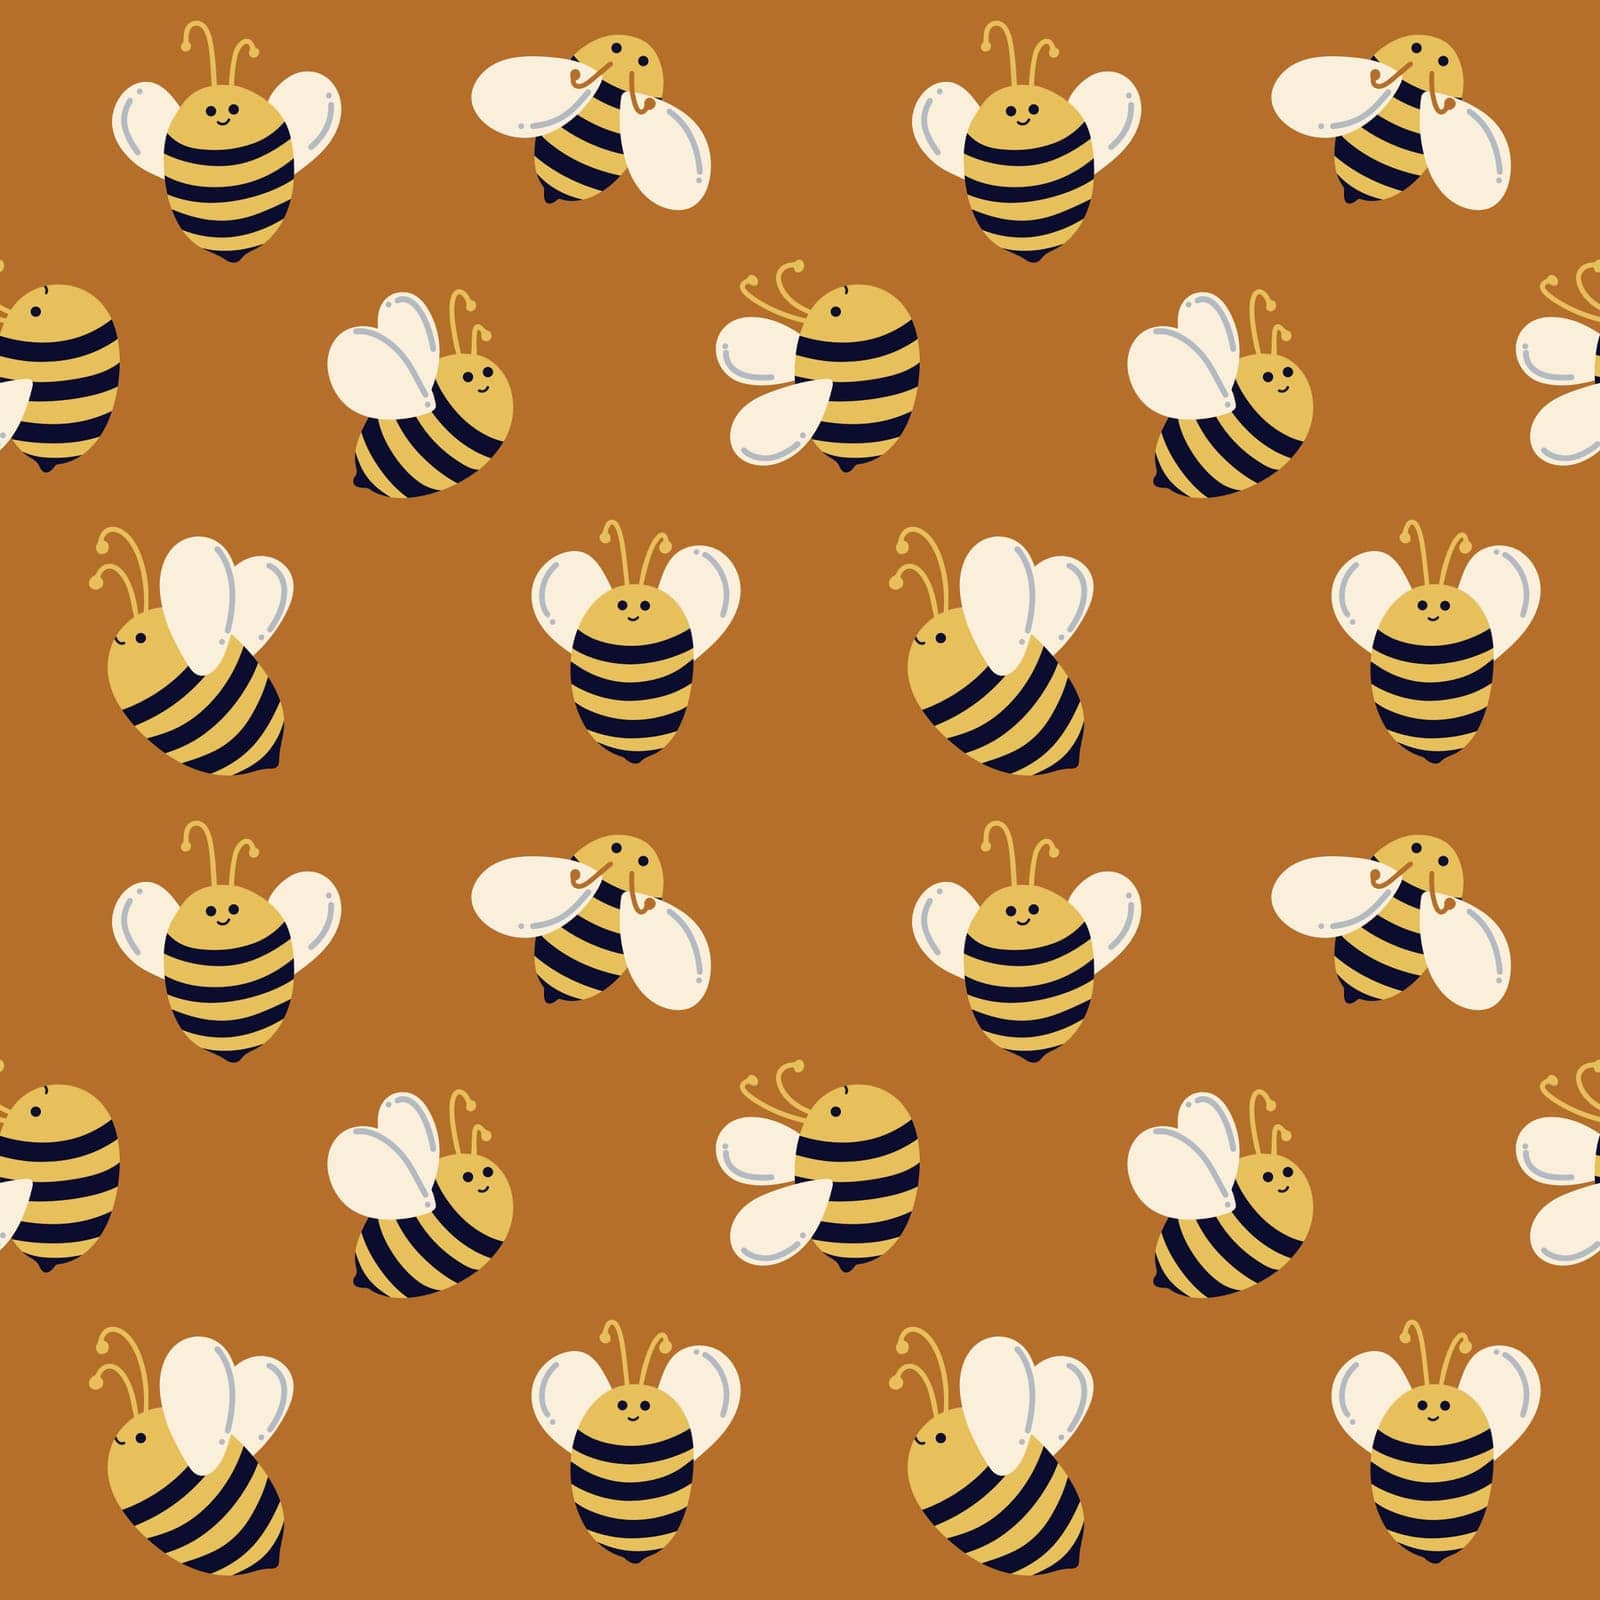 Bees move in different directions on a brown background. Seamless pattern with bees for children